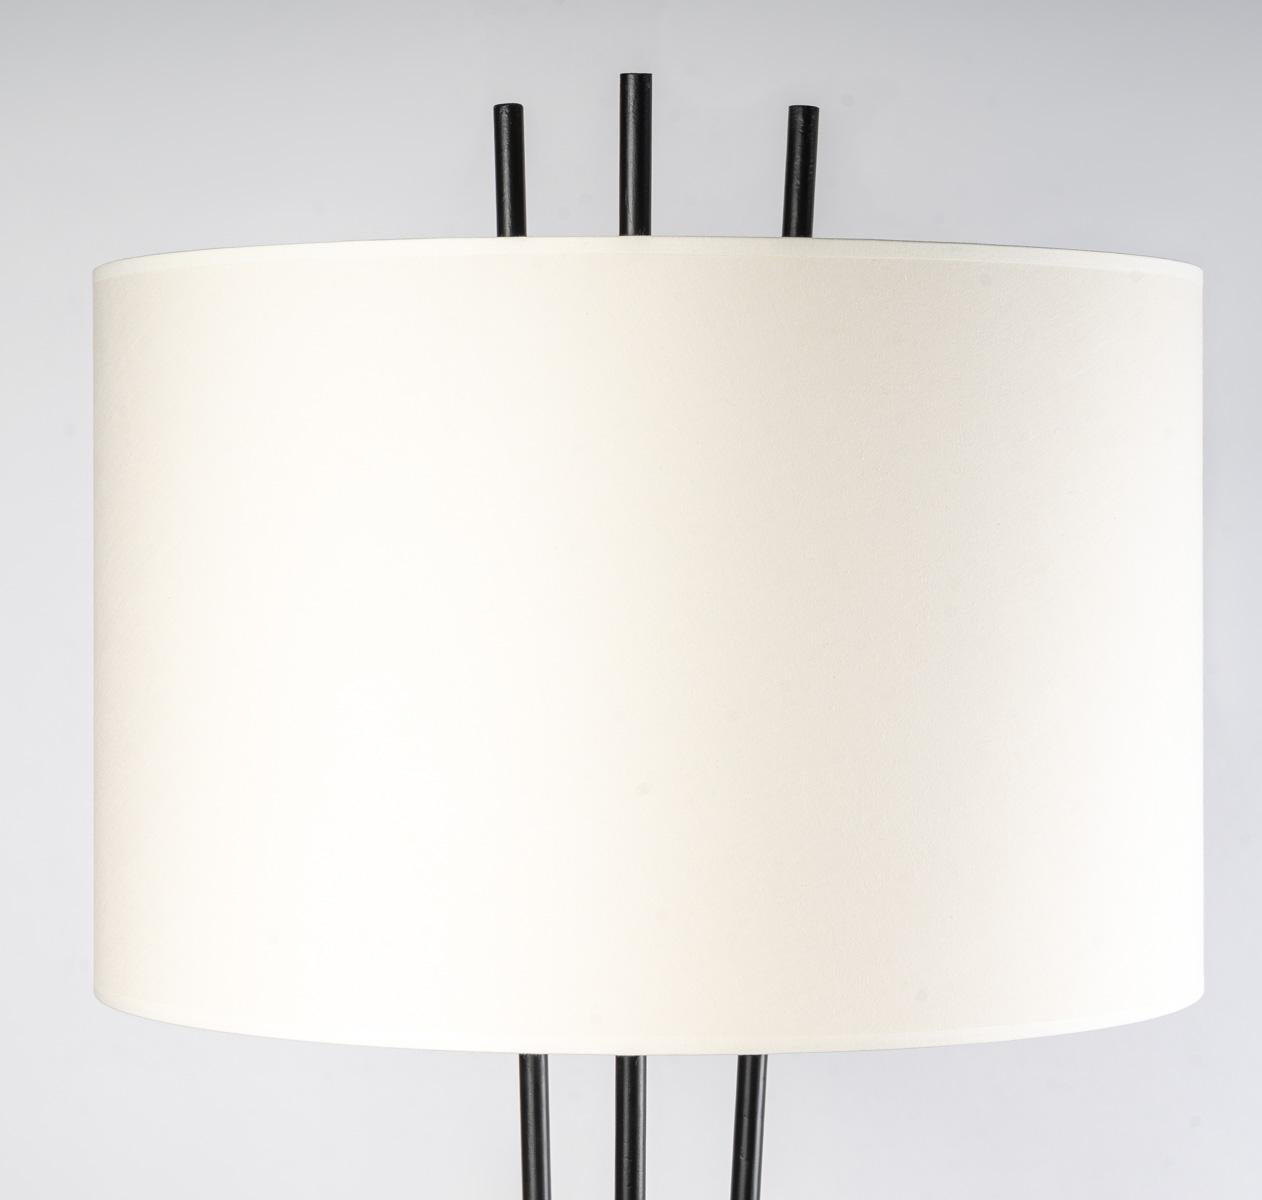 Composed of 3 long vertical rods in black wrought iron opening like a vase.
In the upper part, a large cylindrical lampshade of off-white color (lampshade redone identically) dresses up the floor lamp nicely.

In the lower part, the 3 rods meet and